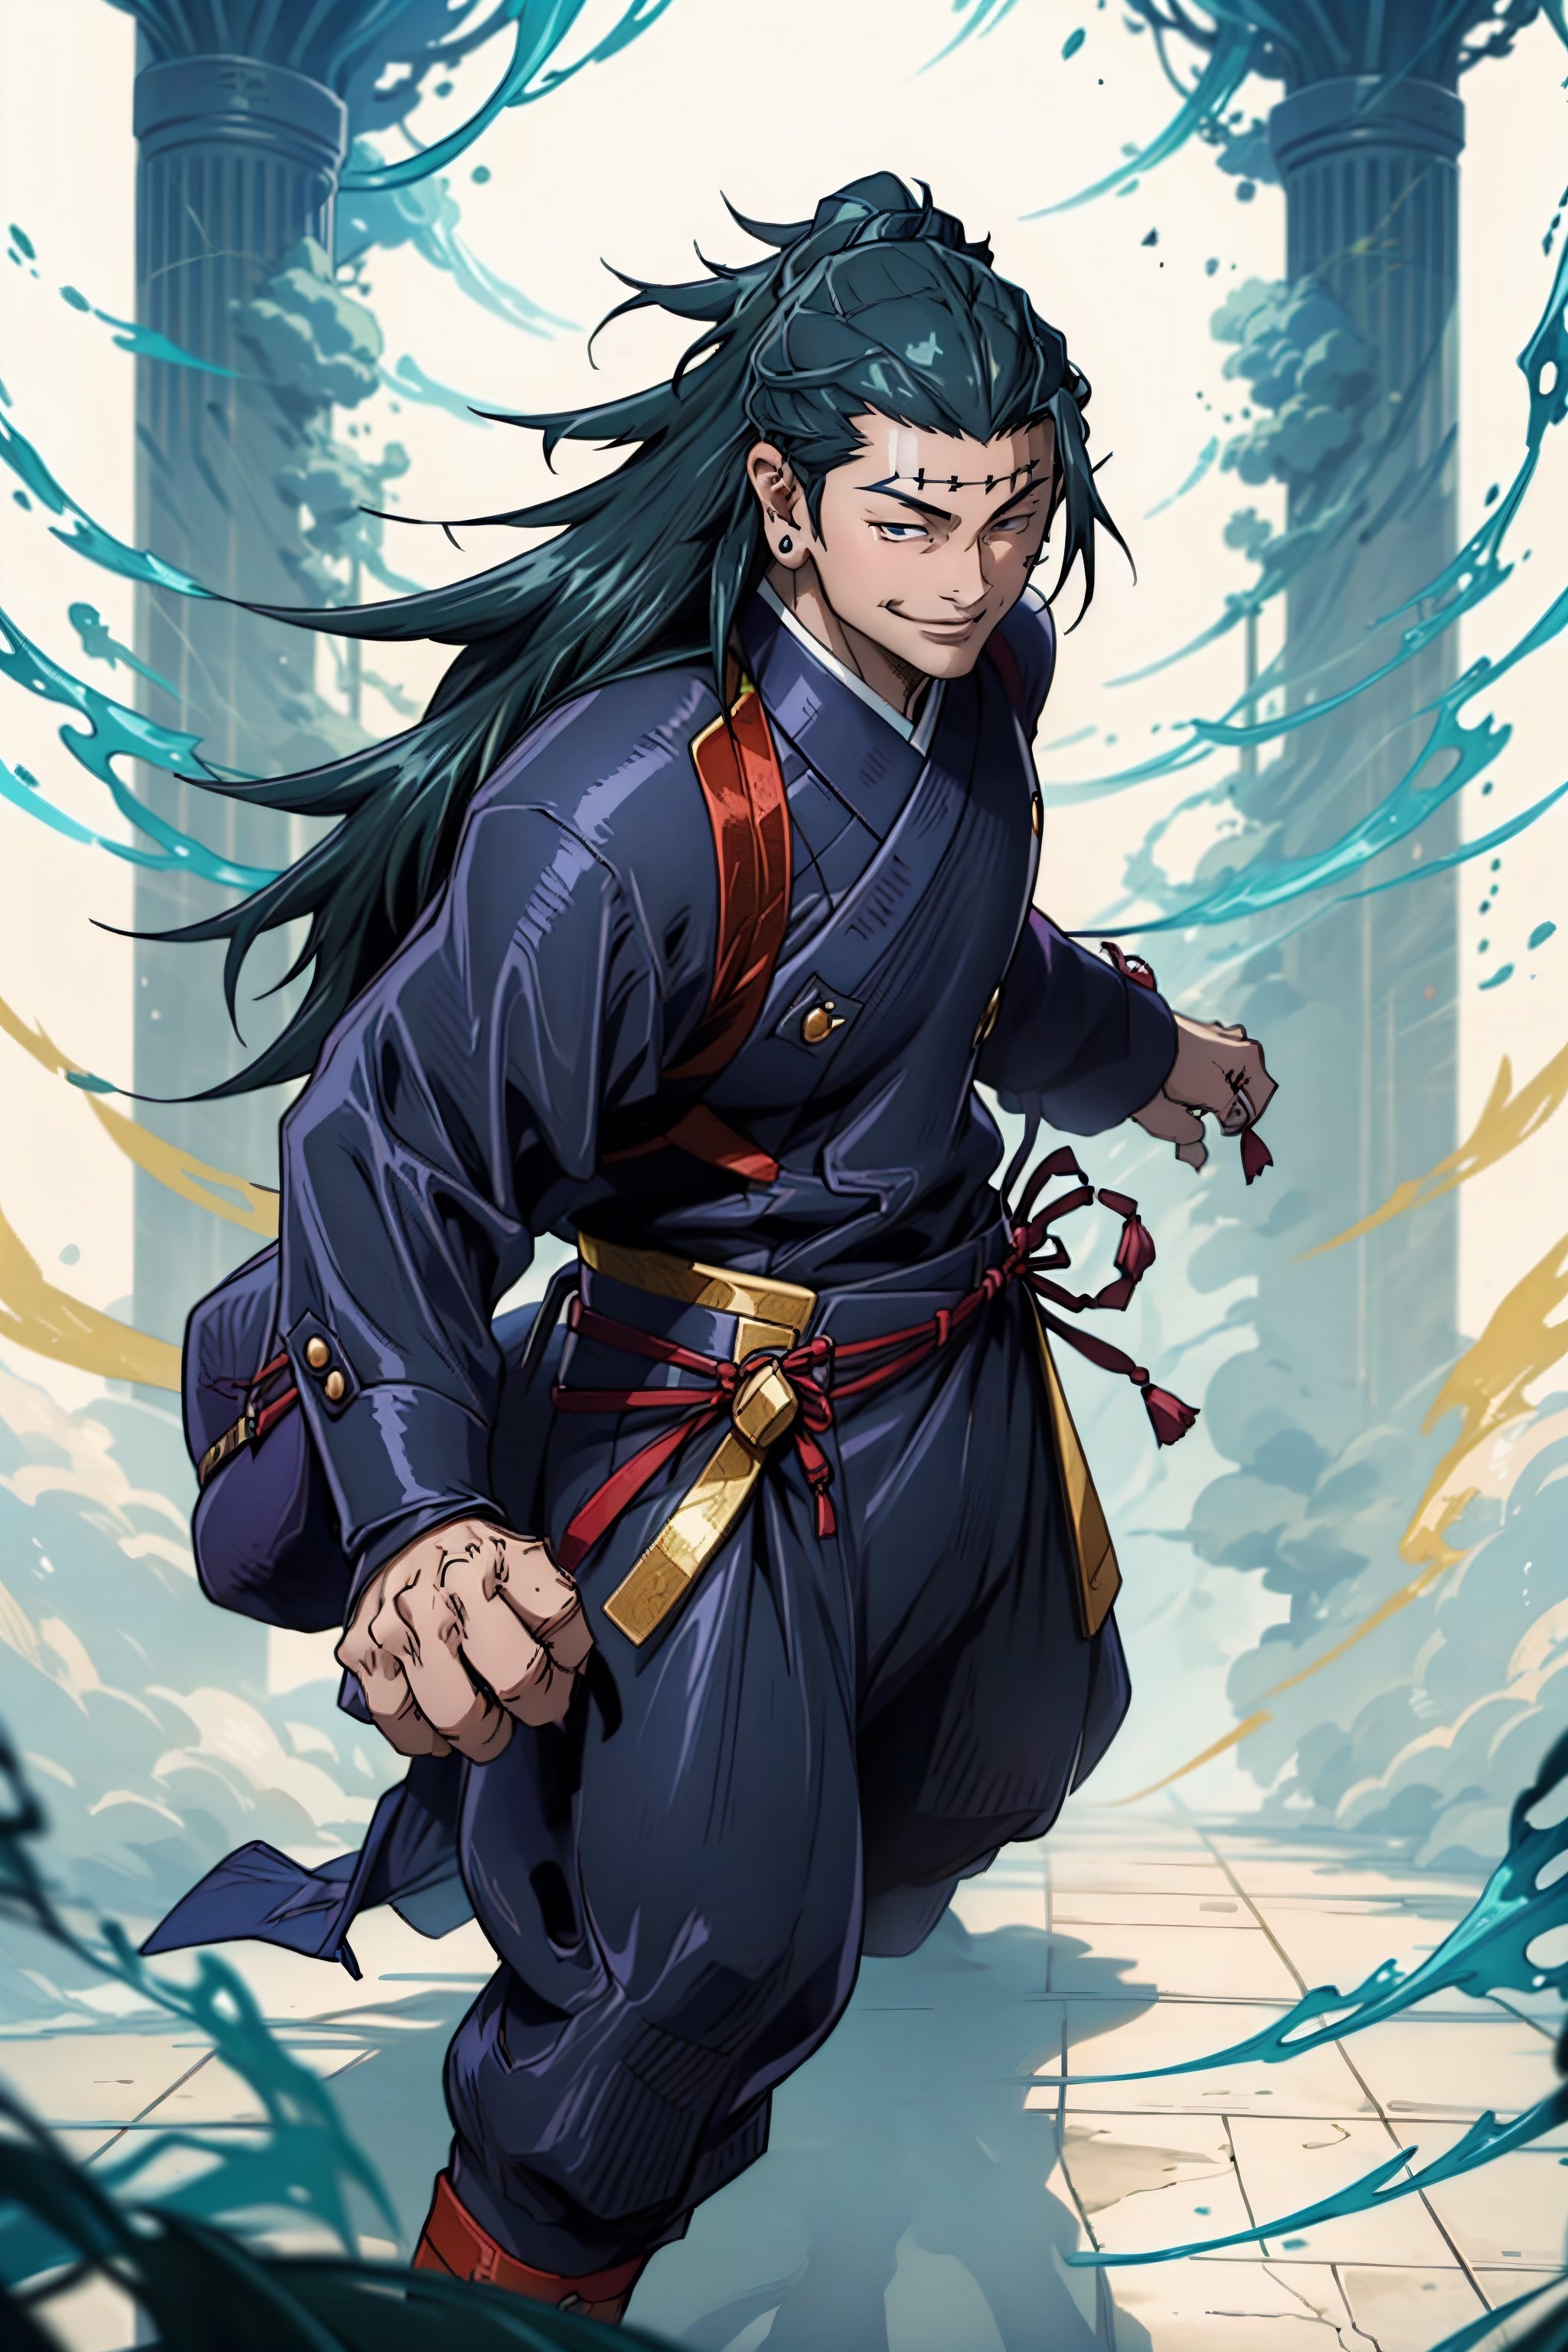  Suguru is a tall, slim man with long black hair  ,fighting , fantasy background  ,smile, fighting style ready for action , using cursis power